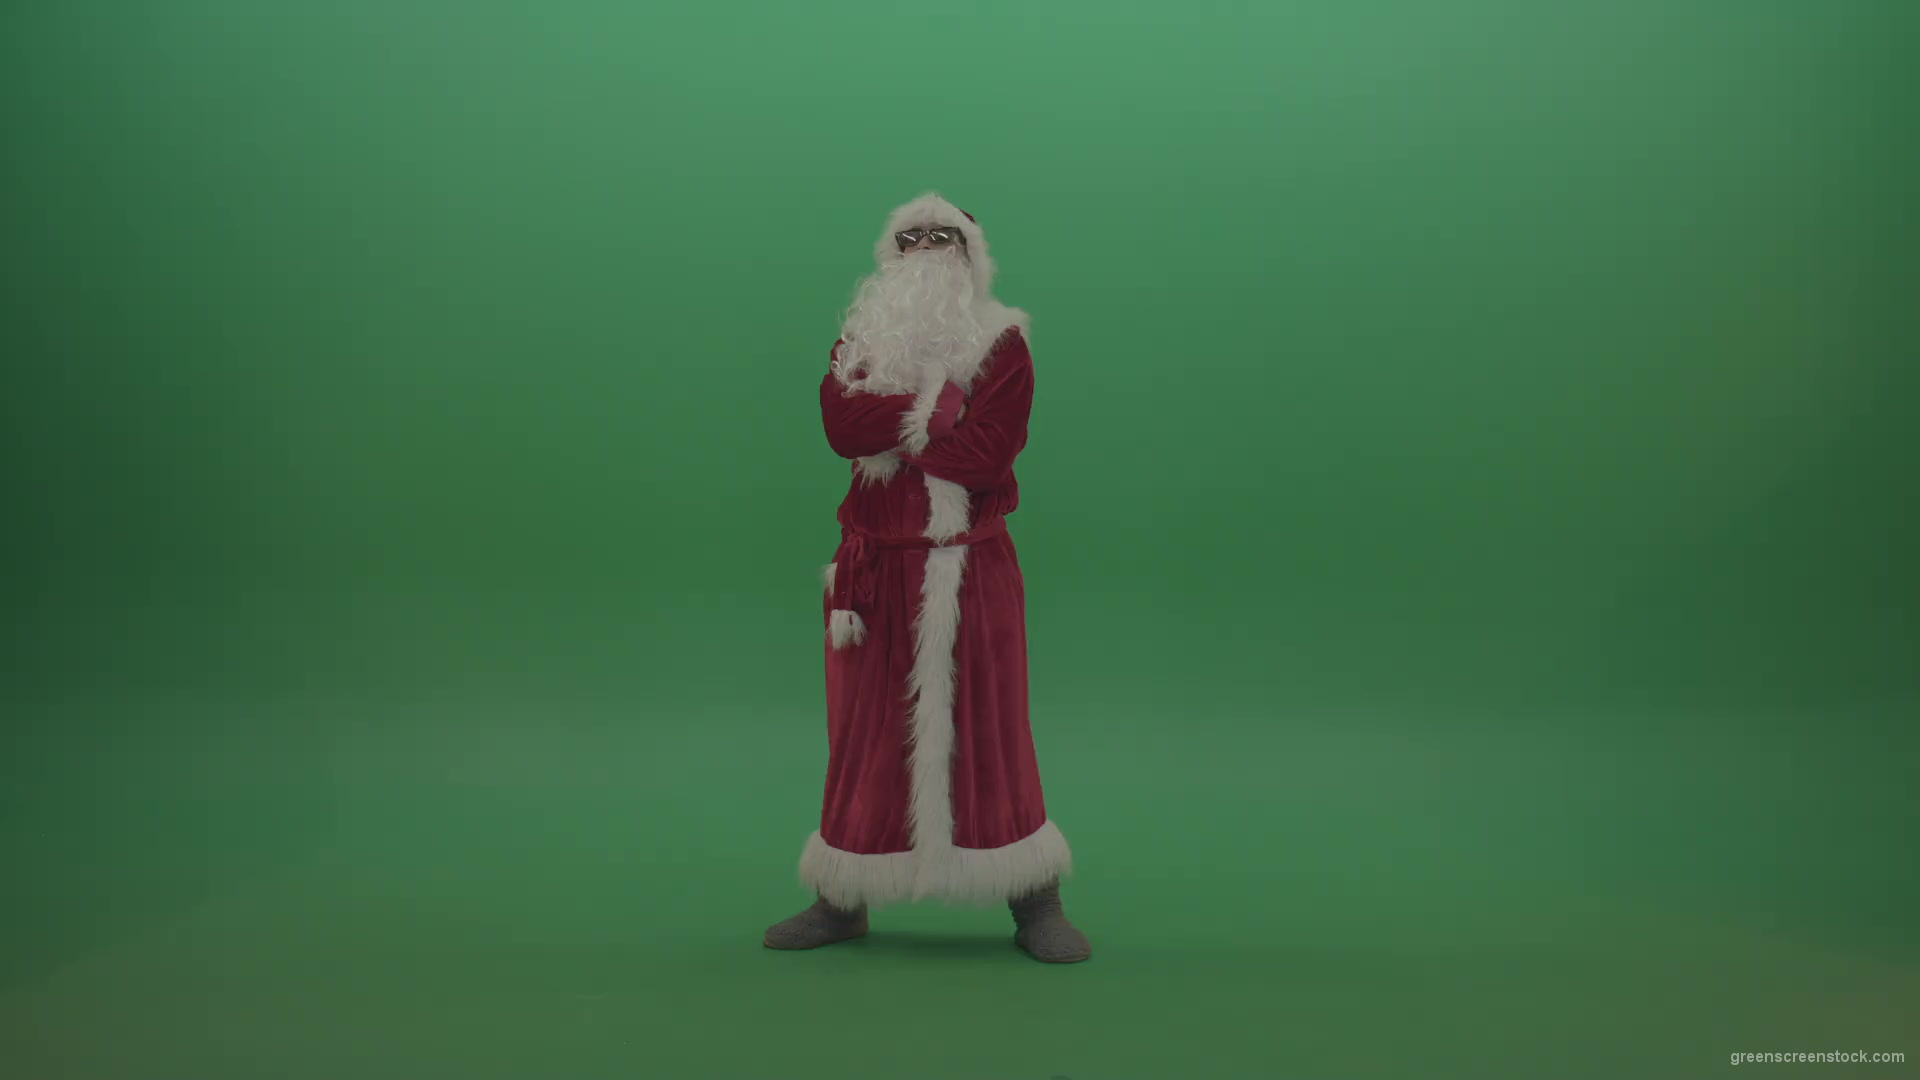 Man-takes-off-his-santa-costumes-over-green-screen-background-1920_001 Green Screen Stock